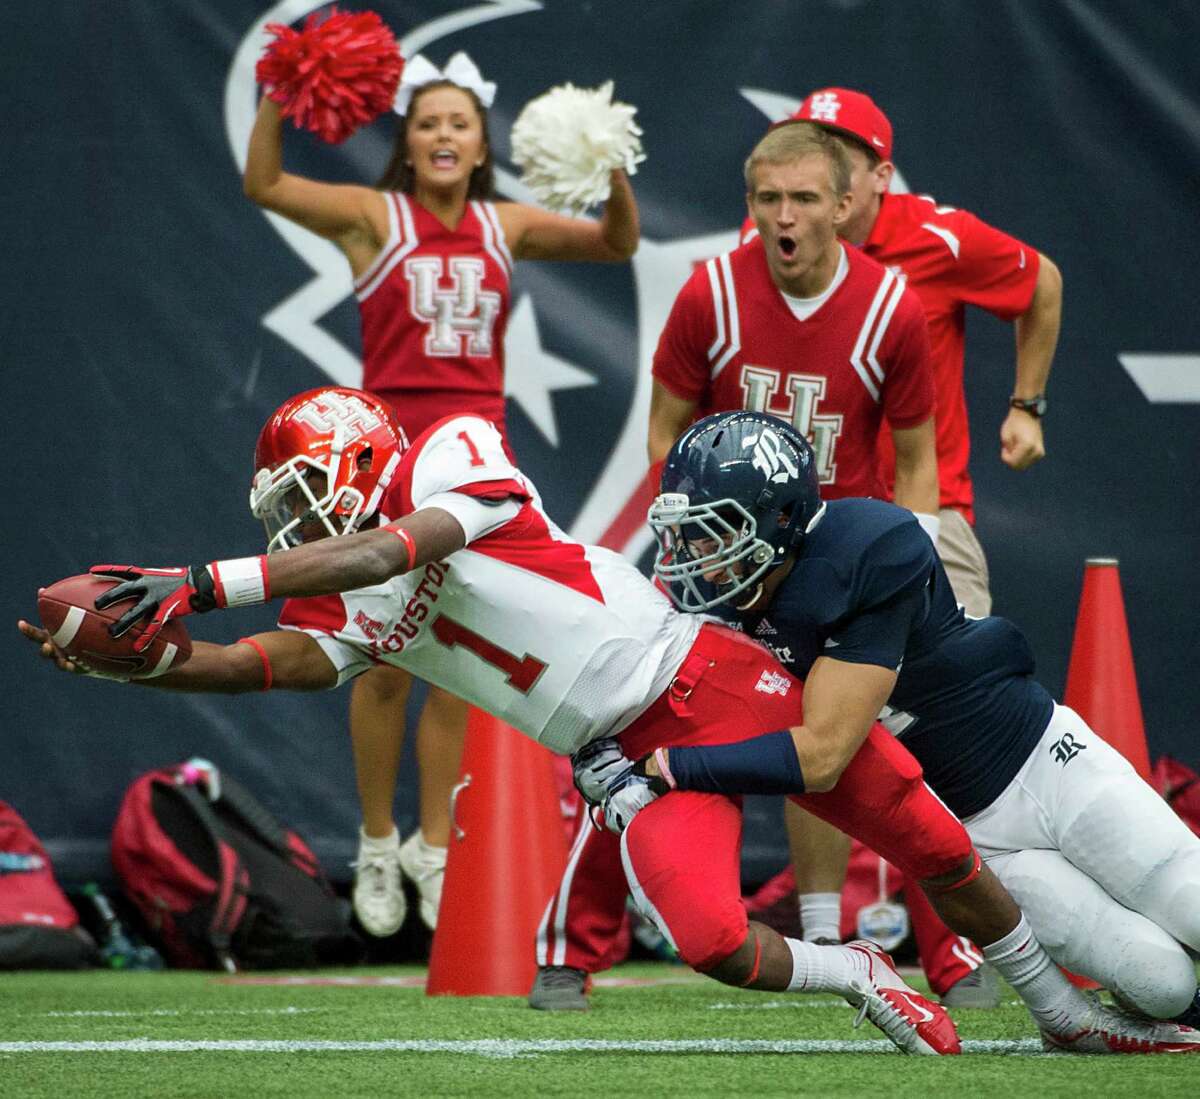 Houston quarterback Greg Ward (1) comes up short of the touchdown as he dives toward the end zone as Rice safety Paul Porras defends during the first half of the annual Bayou Bucket college football game at Reliant Stadium, Saturday, Sept. 21, 2013, in Houston. ( Smiley N. Pool / Houston Chronicle )